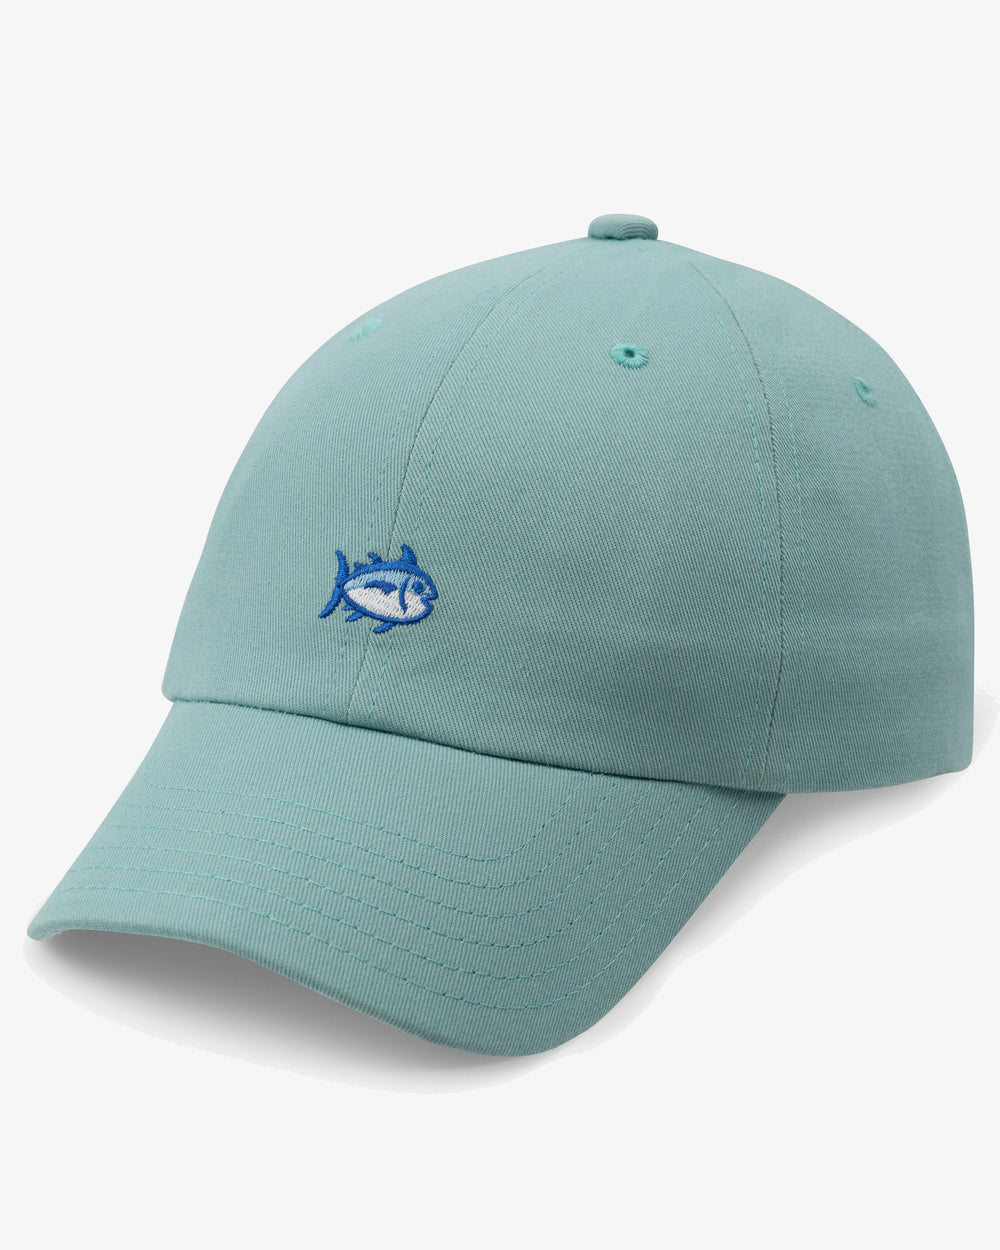 The front view of the Kid's Mini Skipjack Hat by Southern Tide - Wake Blue